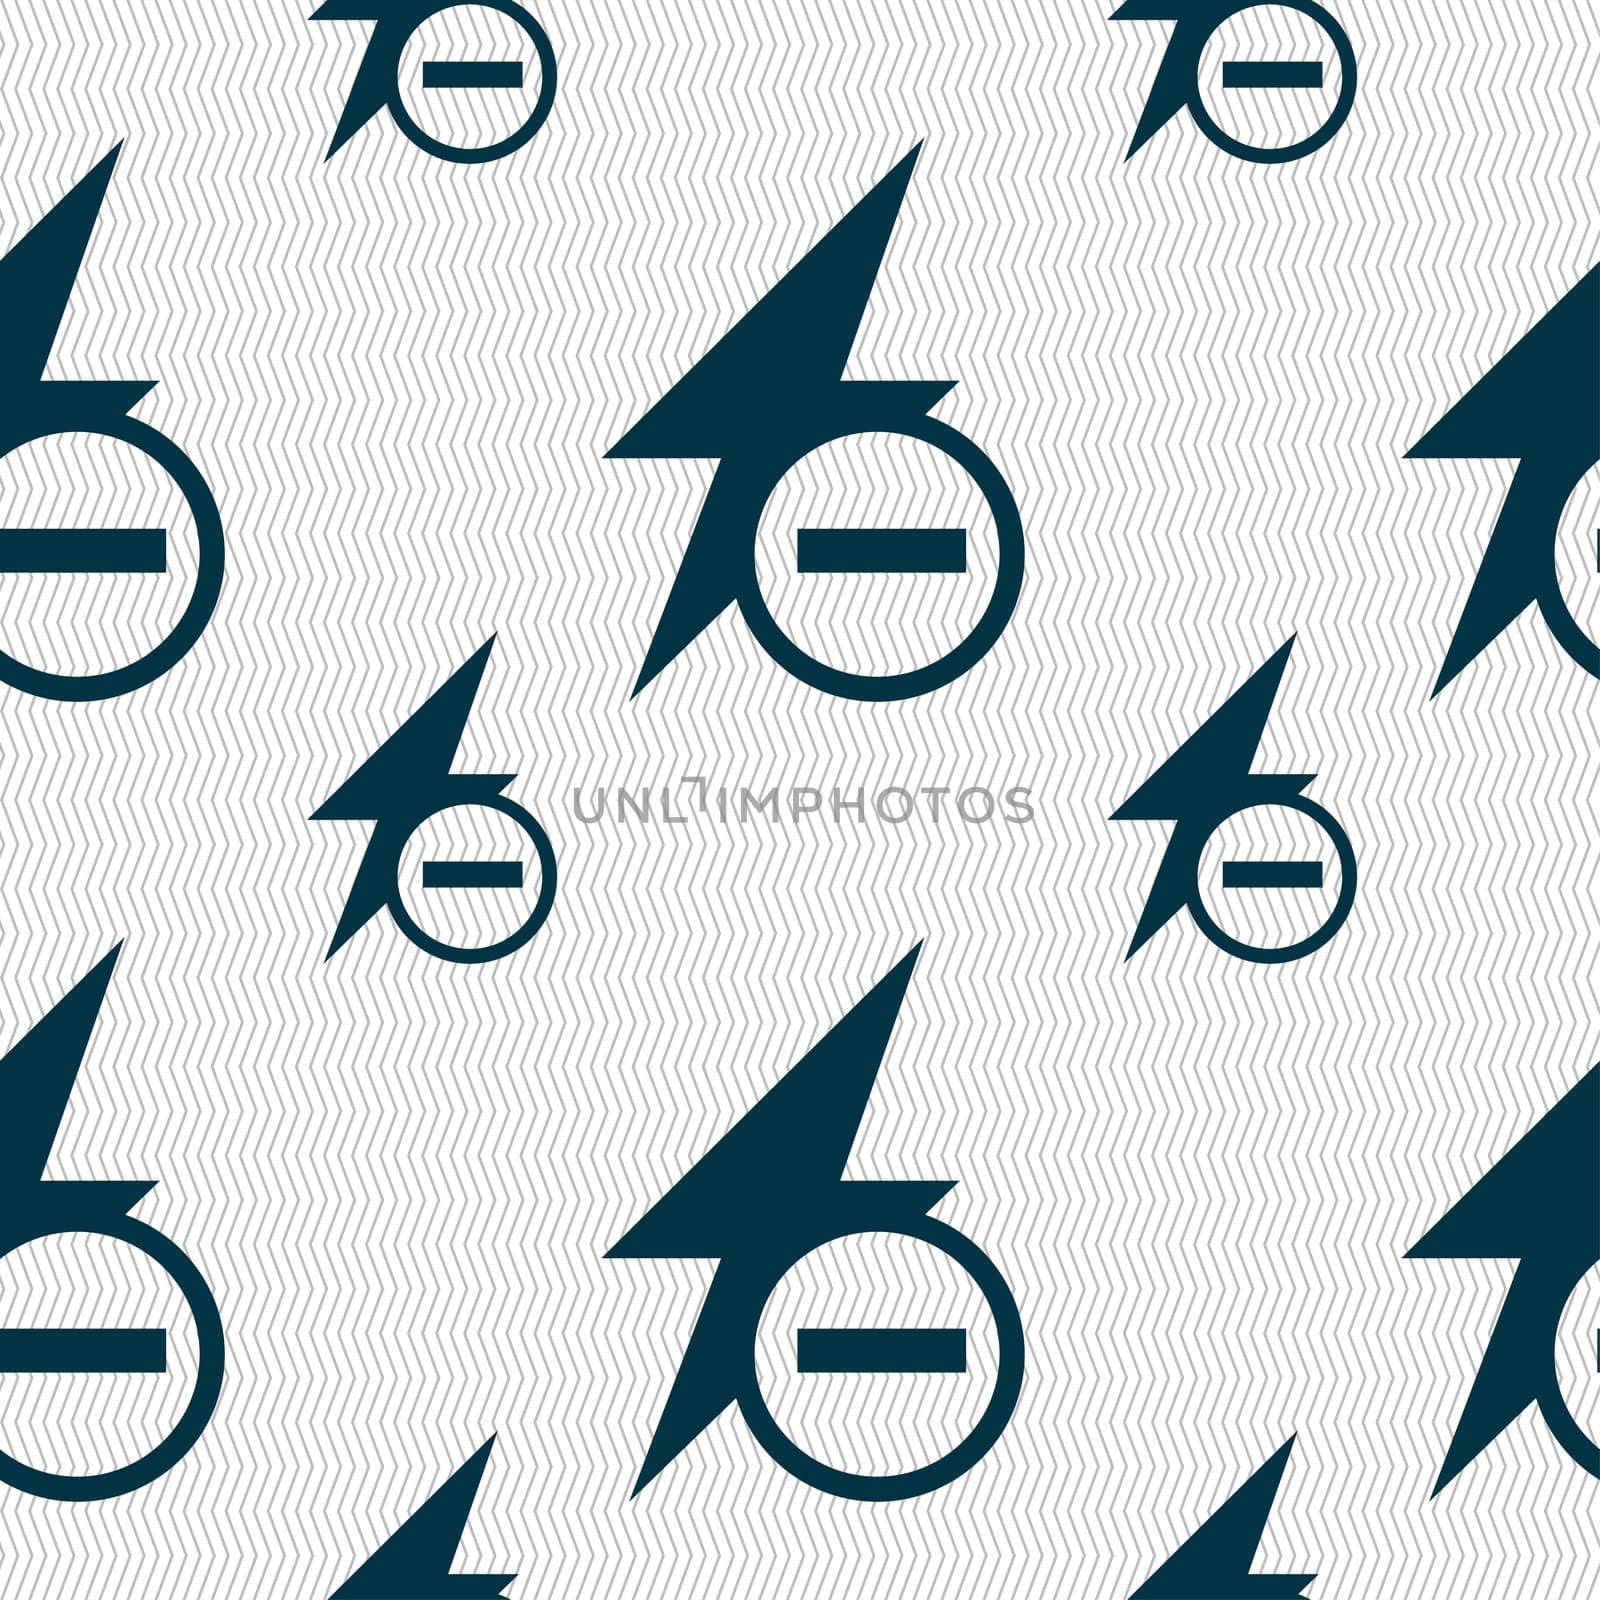 Photo flash icon sign. Seamless pattern with geometric texture. illustration